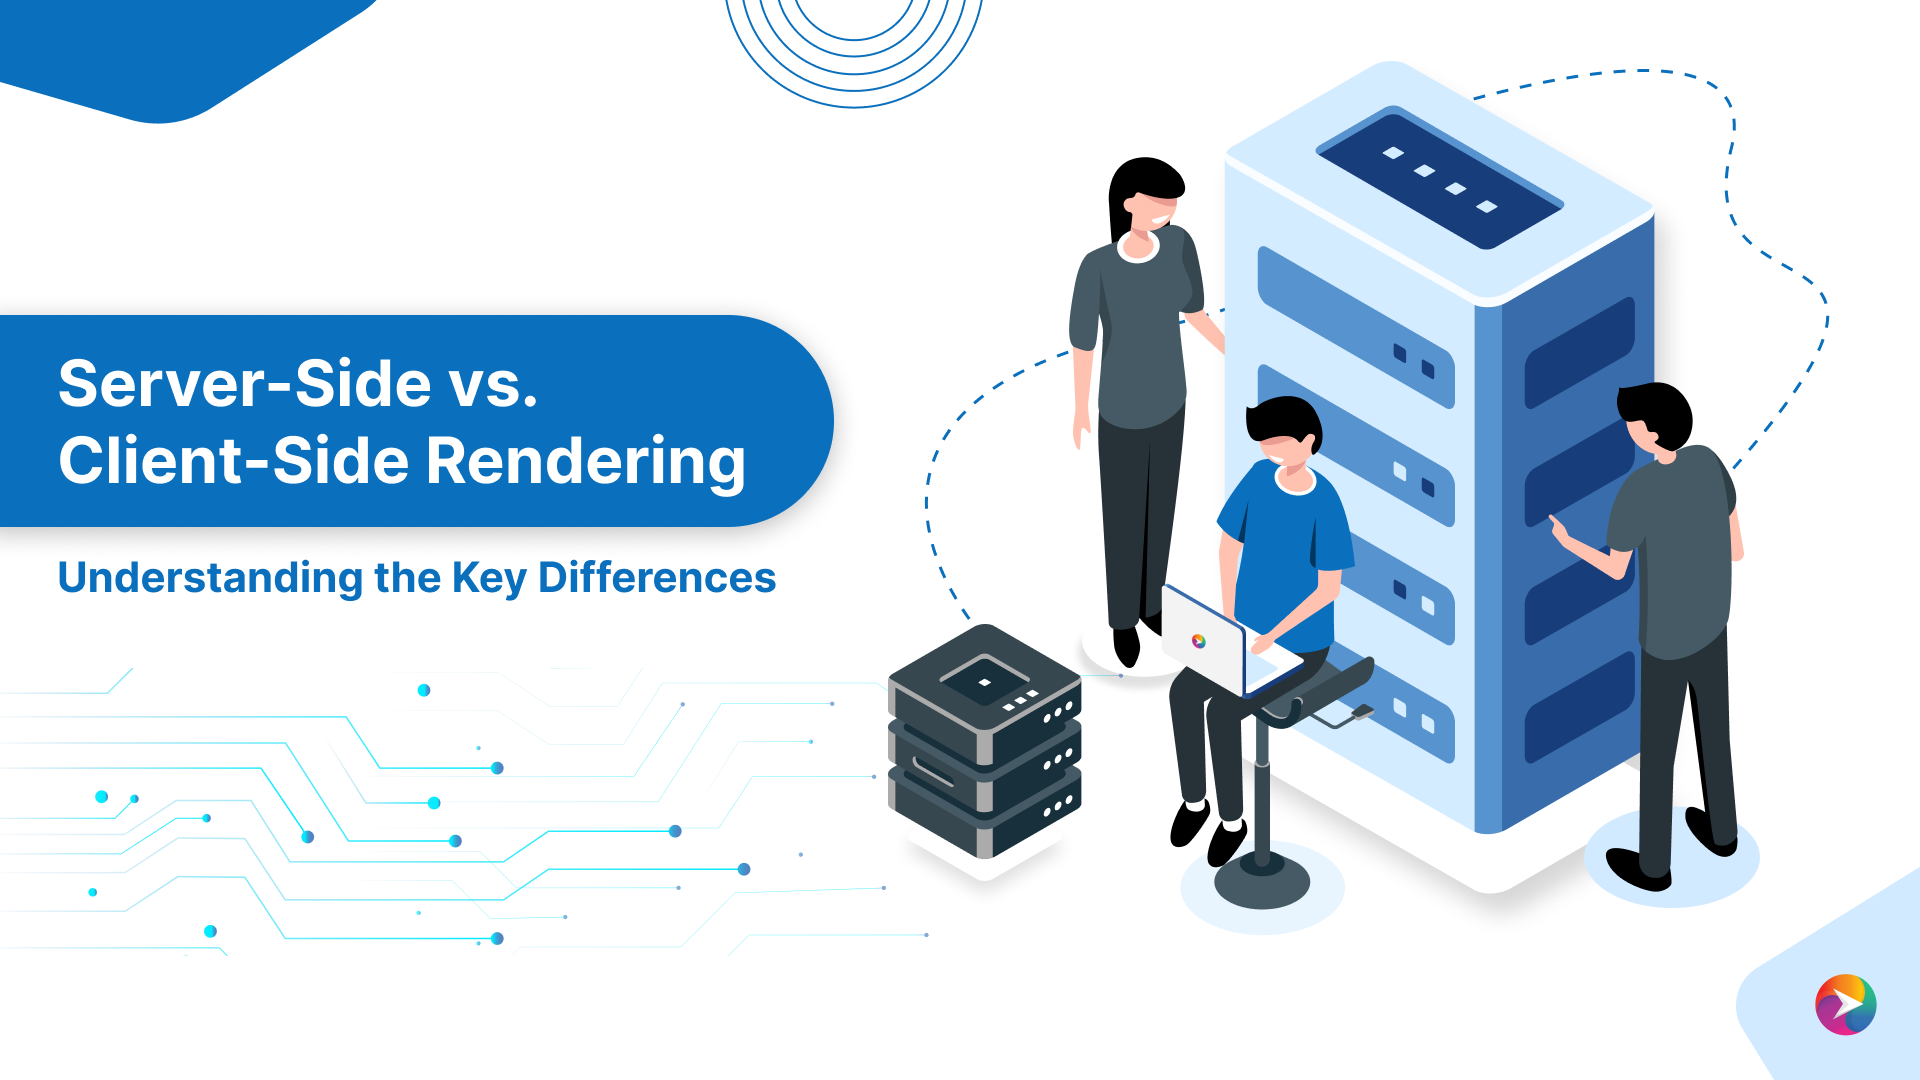 Server-Side vs. Client-Side Rendering: Understanding the Key Differences